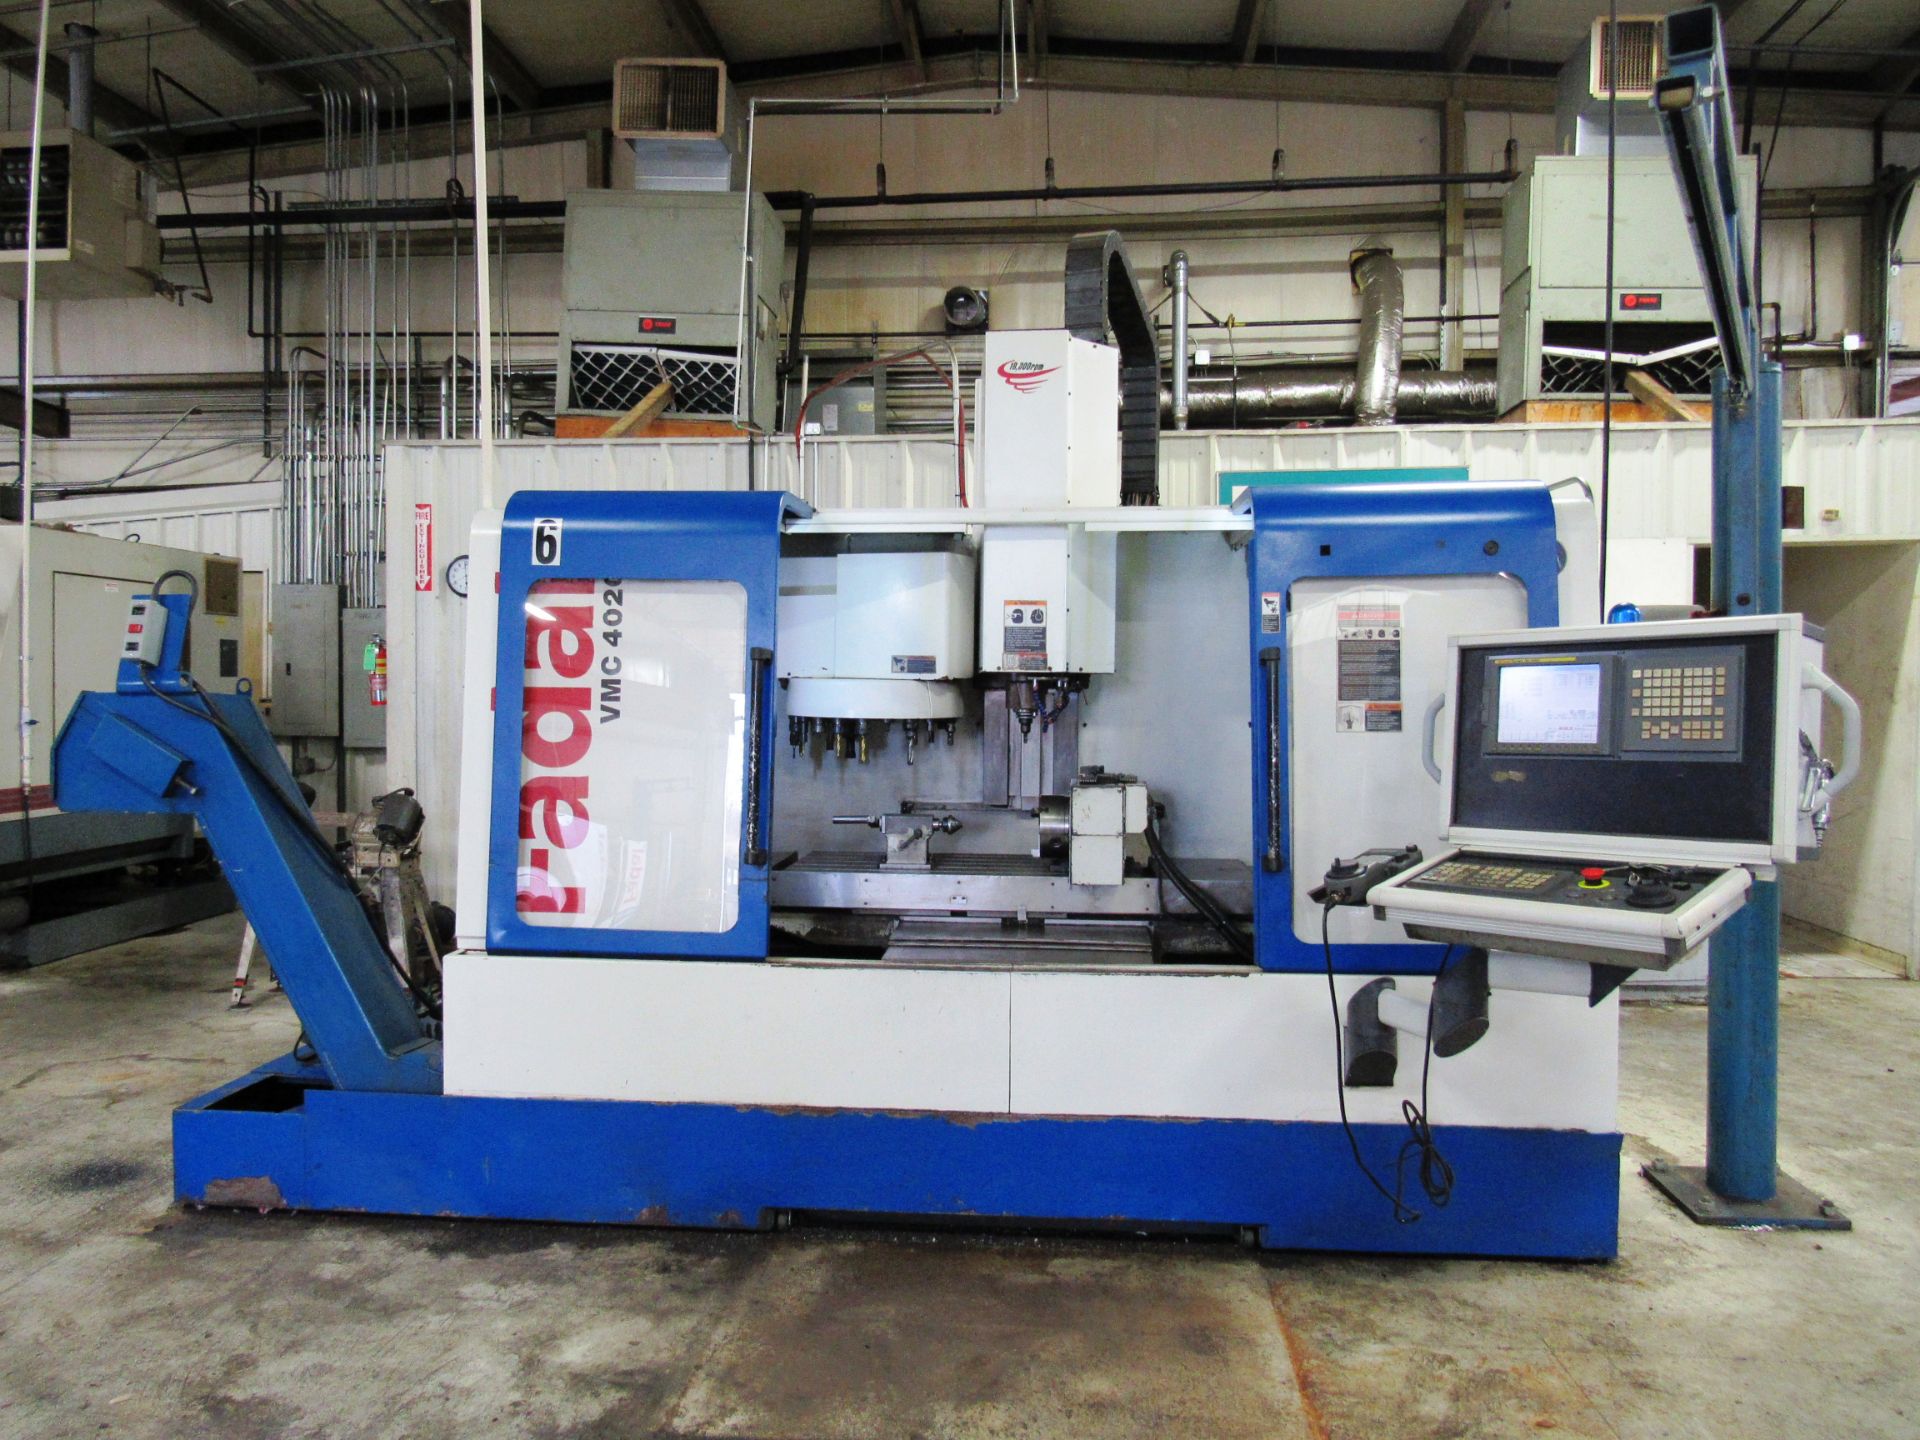 Fadal VMC-4020HT 4-Axis CNC Vertical Machining Center - Image 2 of 4